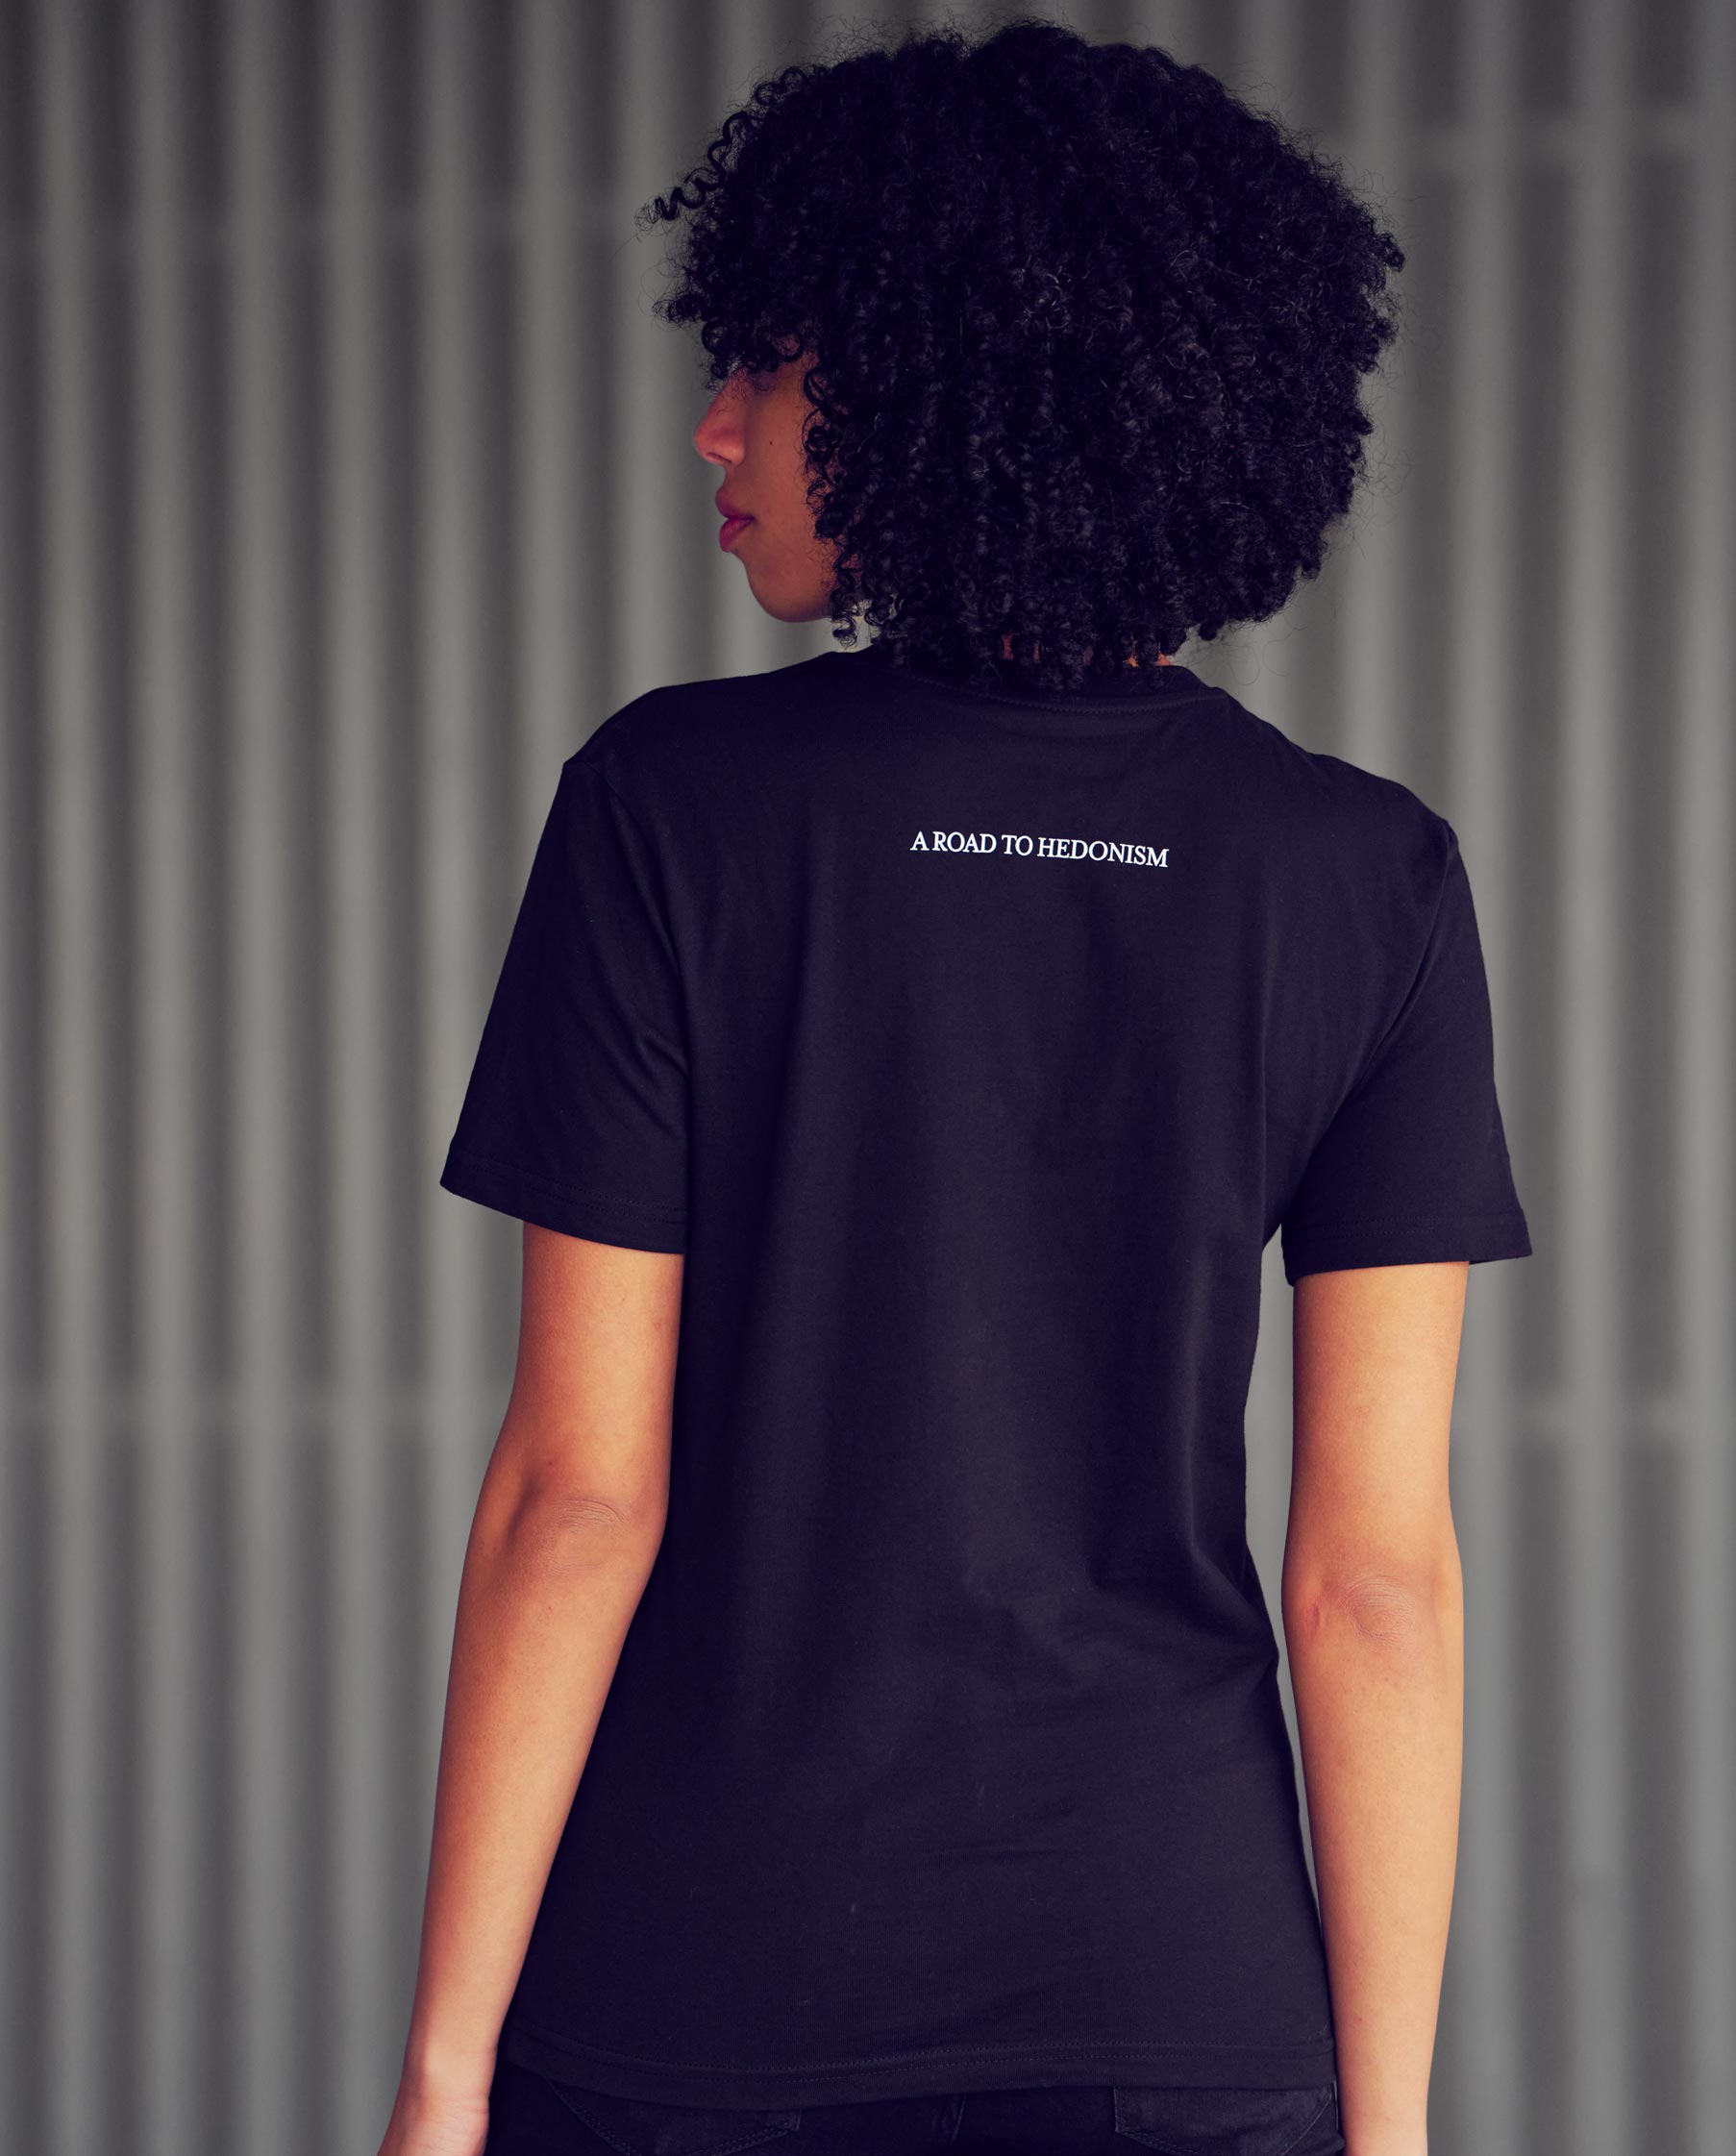 Hedonic Machines T-Shirt black - a story of [re]creation - basic